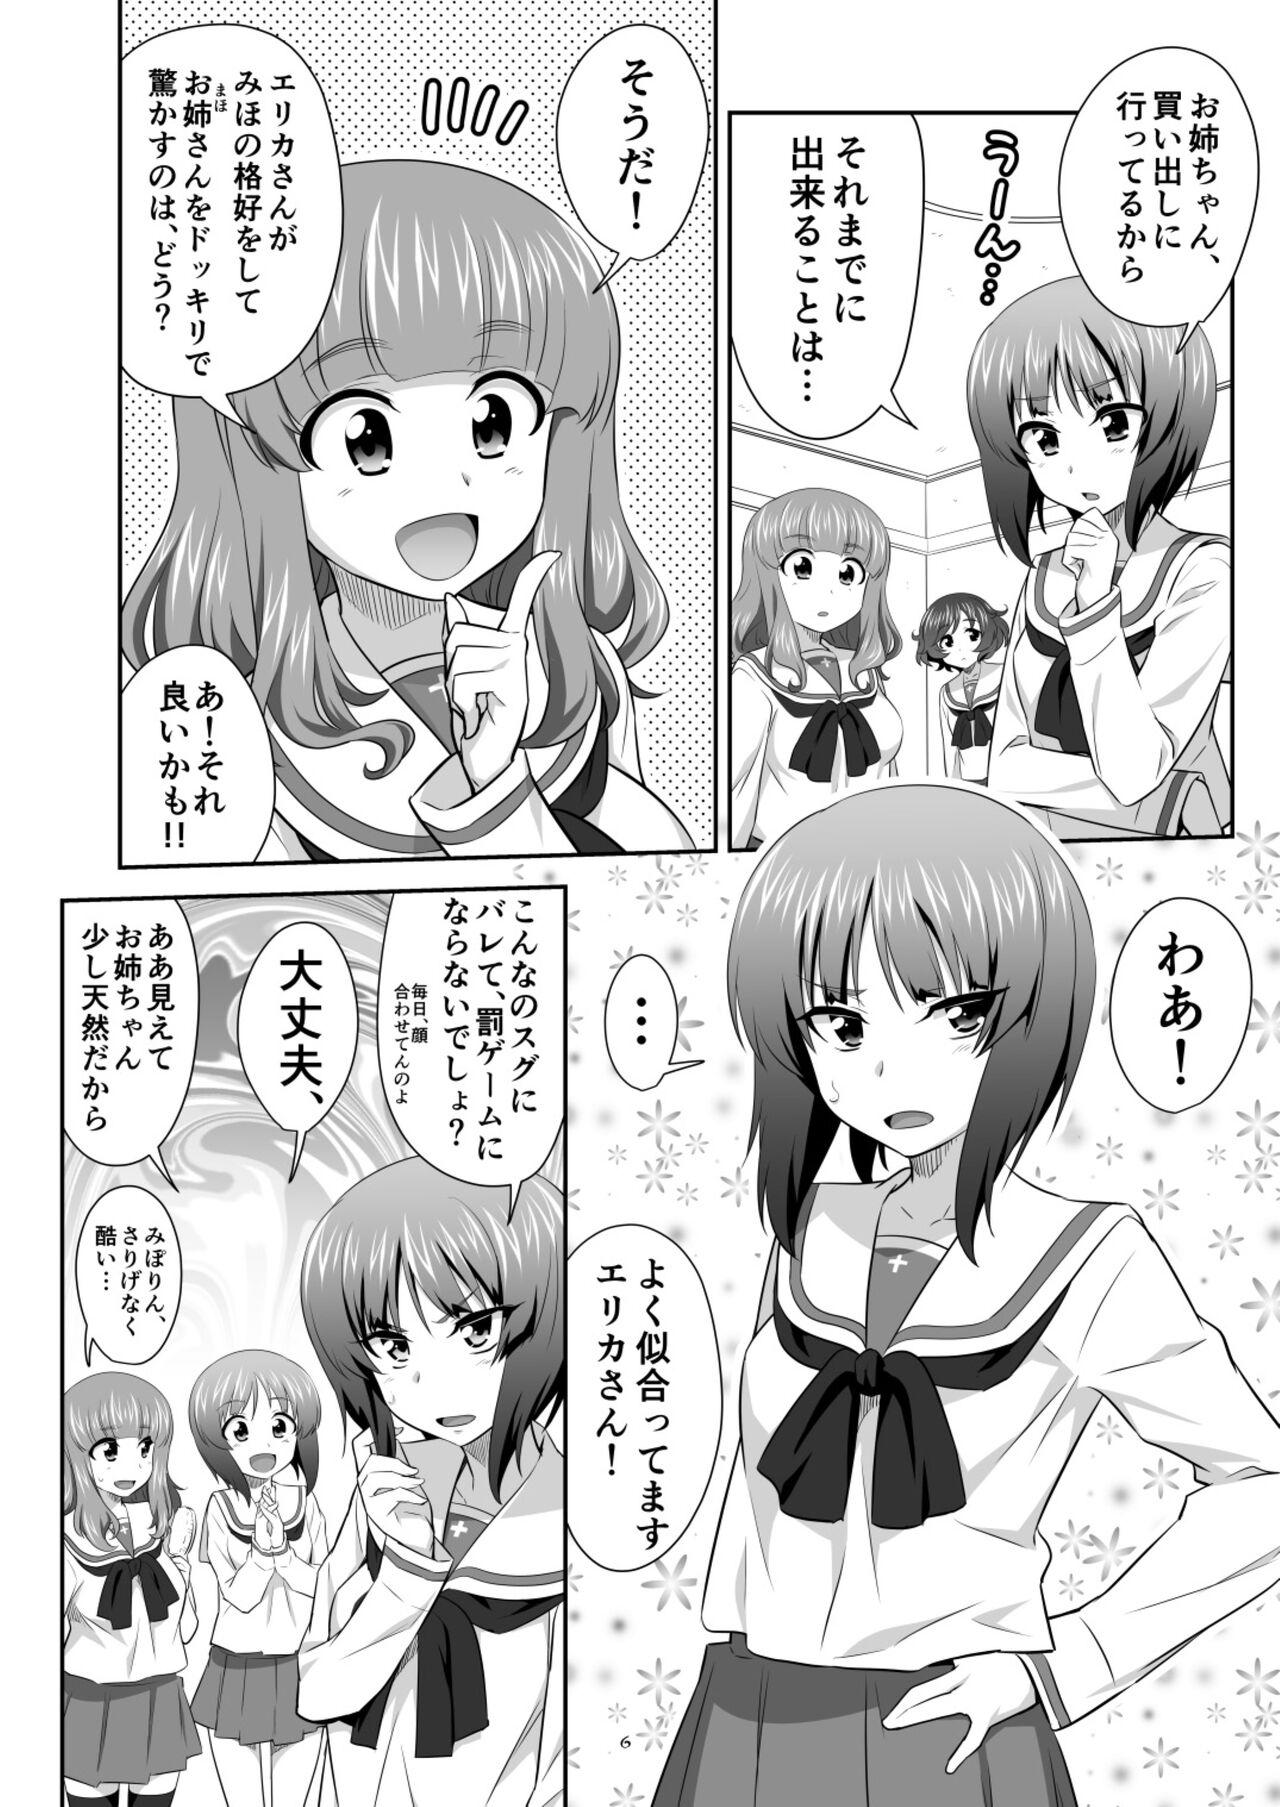 Trans ツリ目道3 - Girls und panzer Real Amateurs - Page 6